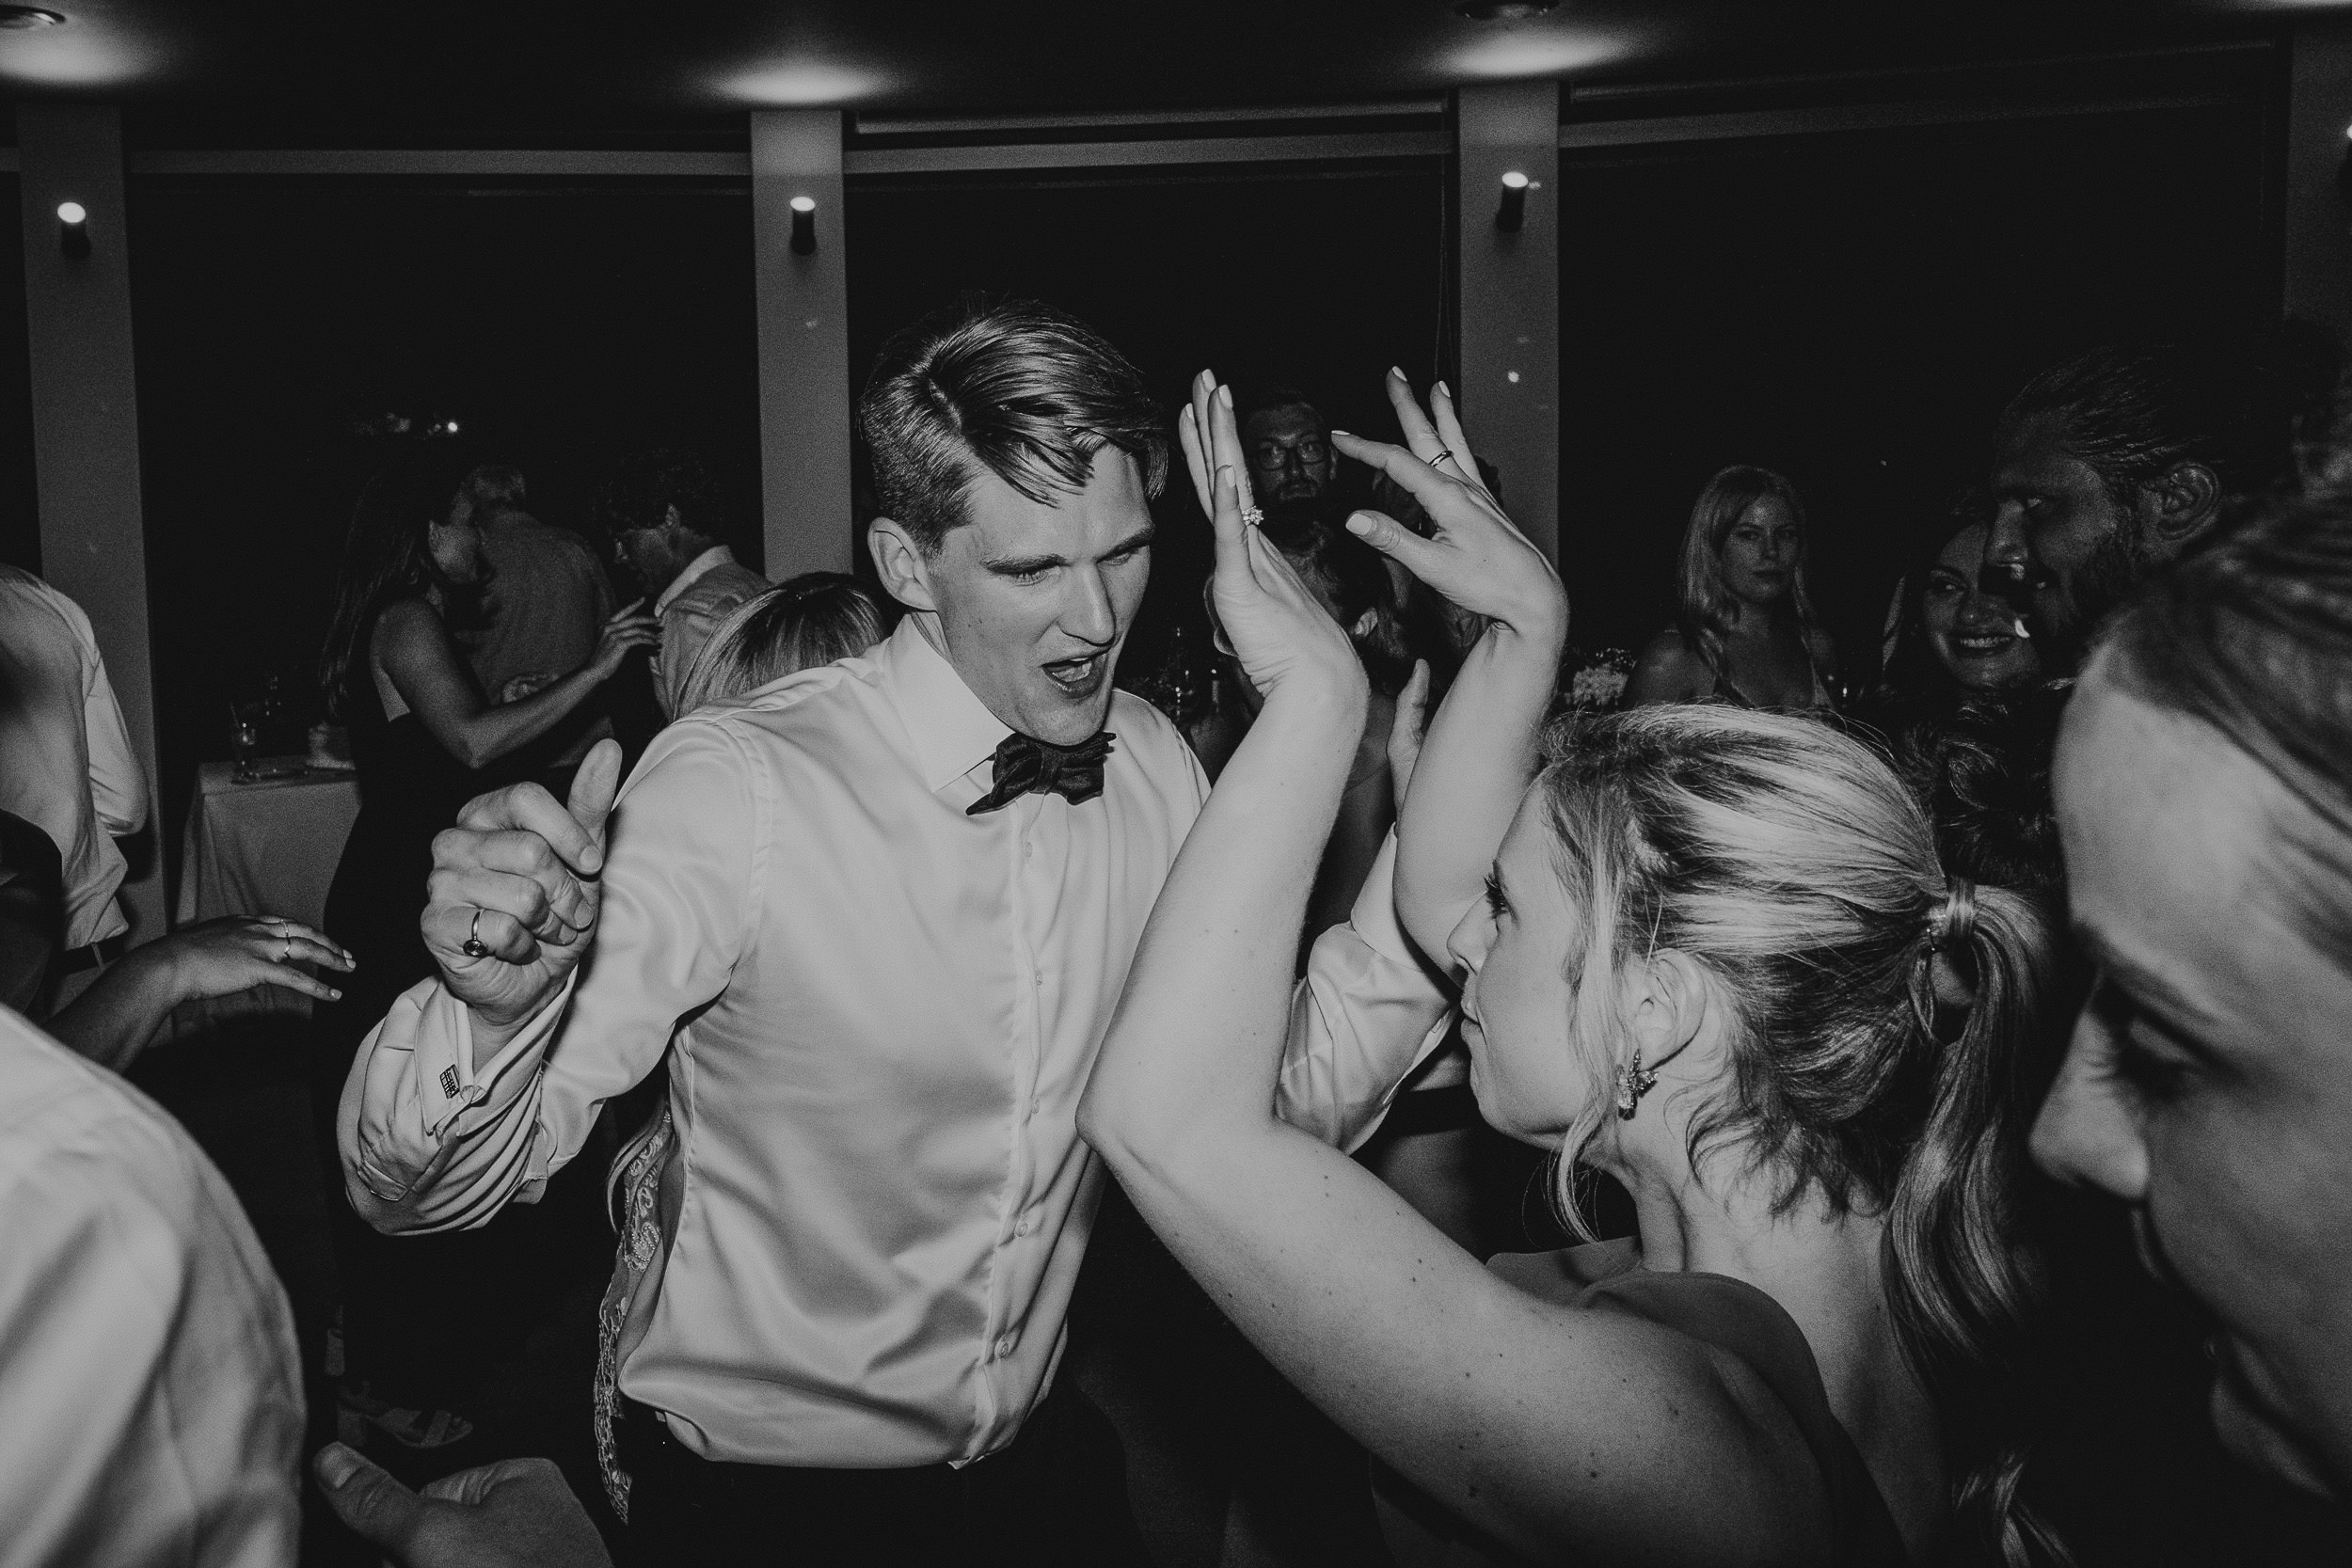 A black and white photo capturing a couple's dance at a wedding, taken by a wedding photographer.